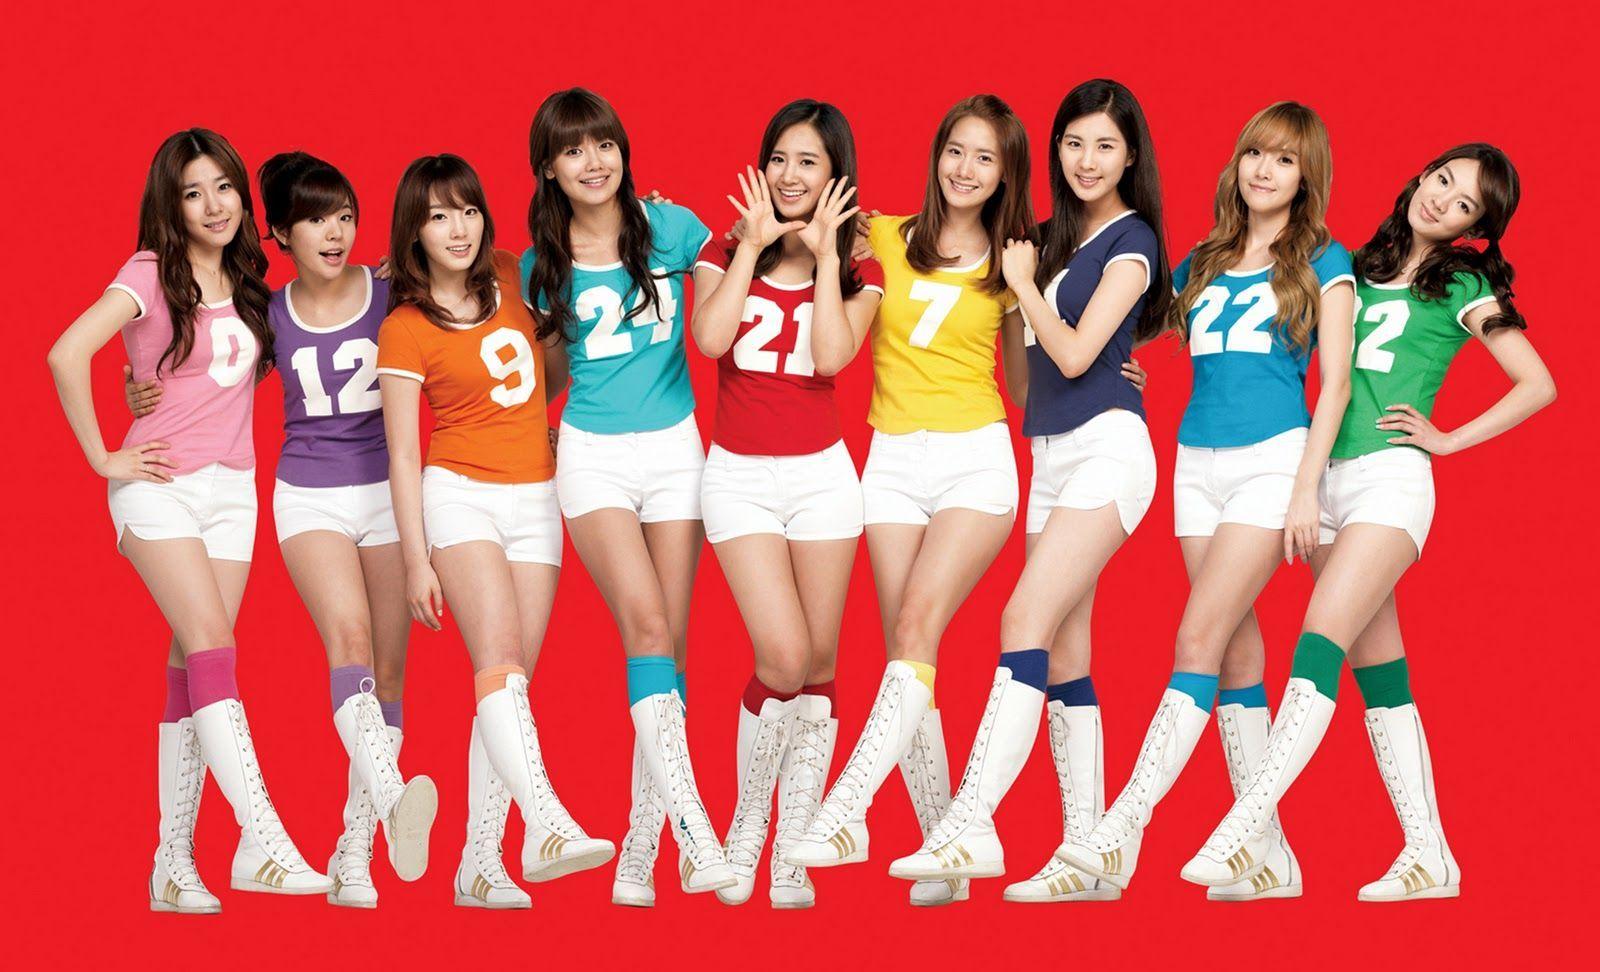 170+ Girls' Generation (SNSD) HD Wallpapers and Backgrounds